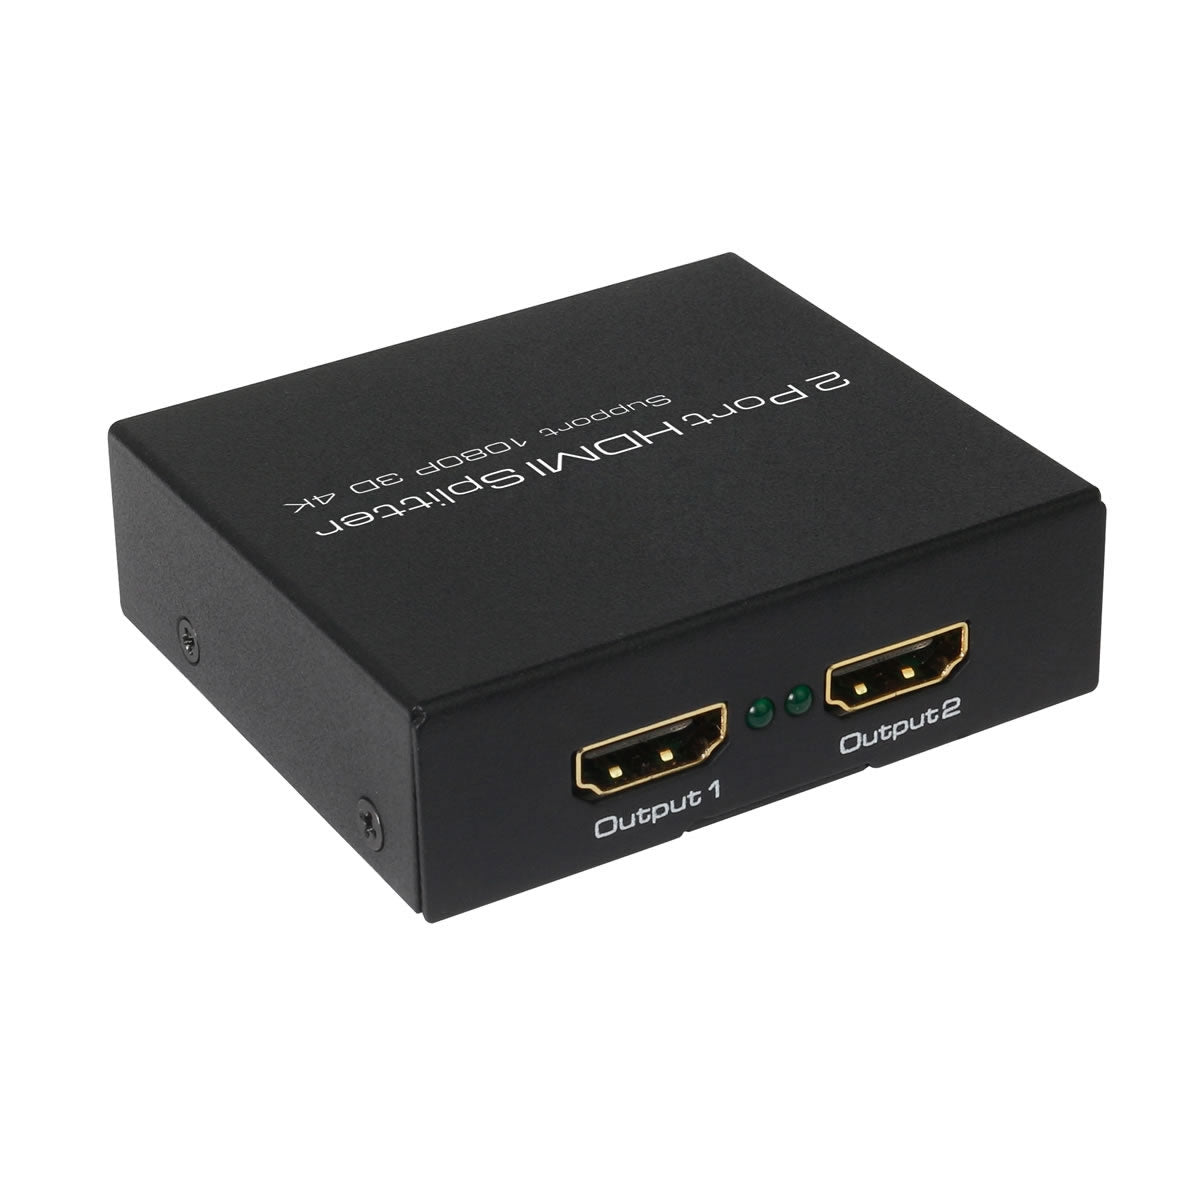 Manhattan 4K HDMI Splitter 1 in 2 Out – 4K@30Hz 2 Output 1 Output Ports,  HDCP Compliant, Double Adapter HD Hub Amplifier with HDMI Cable, 1080P 3D 